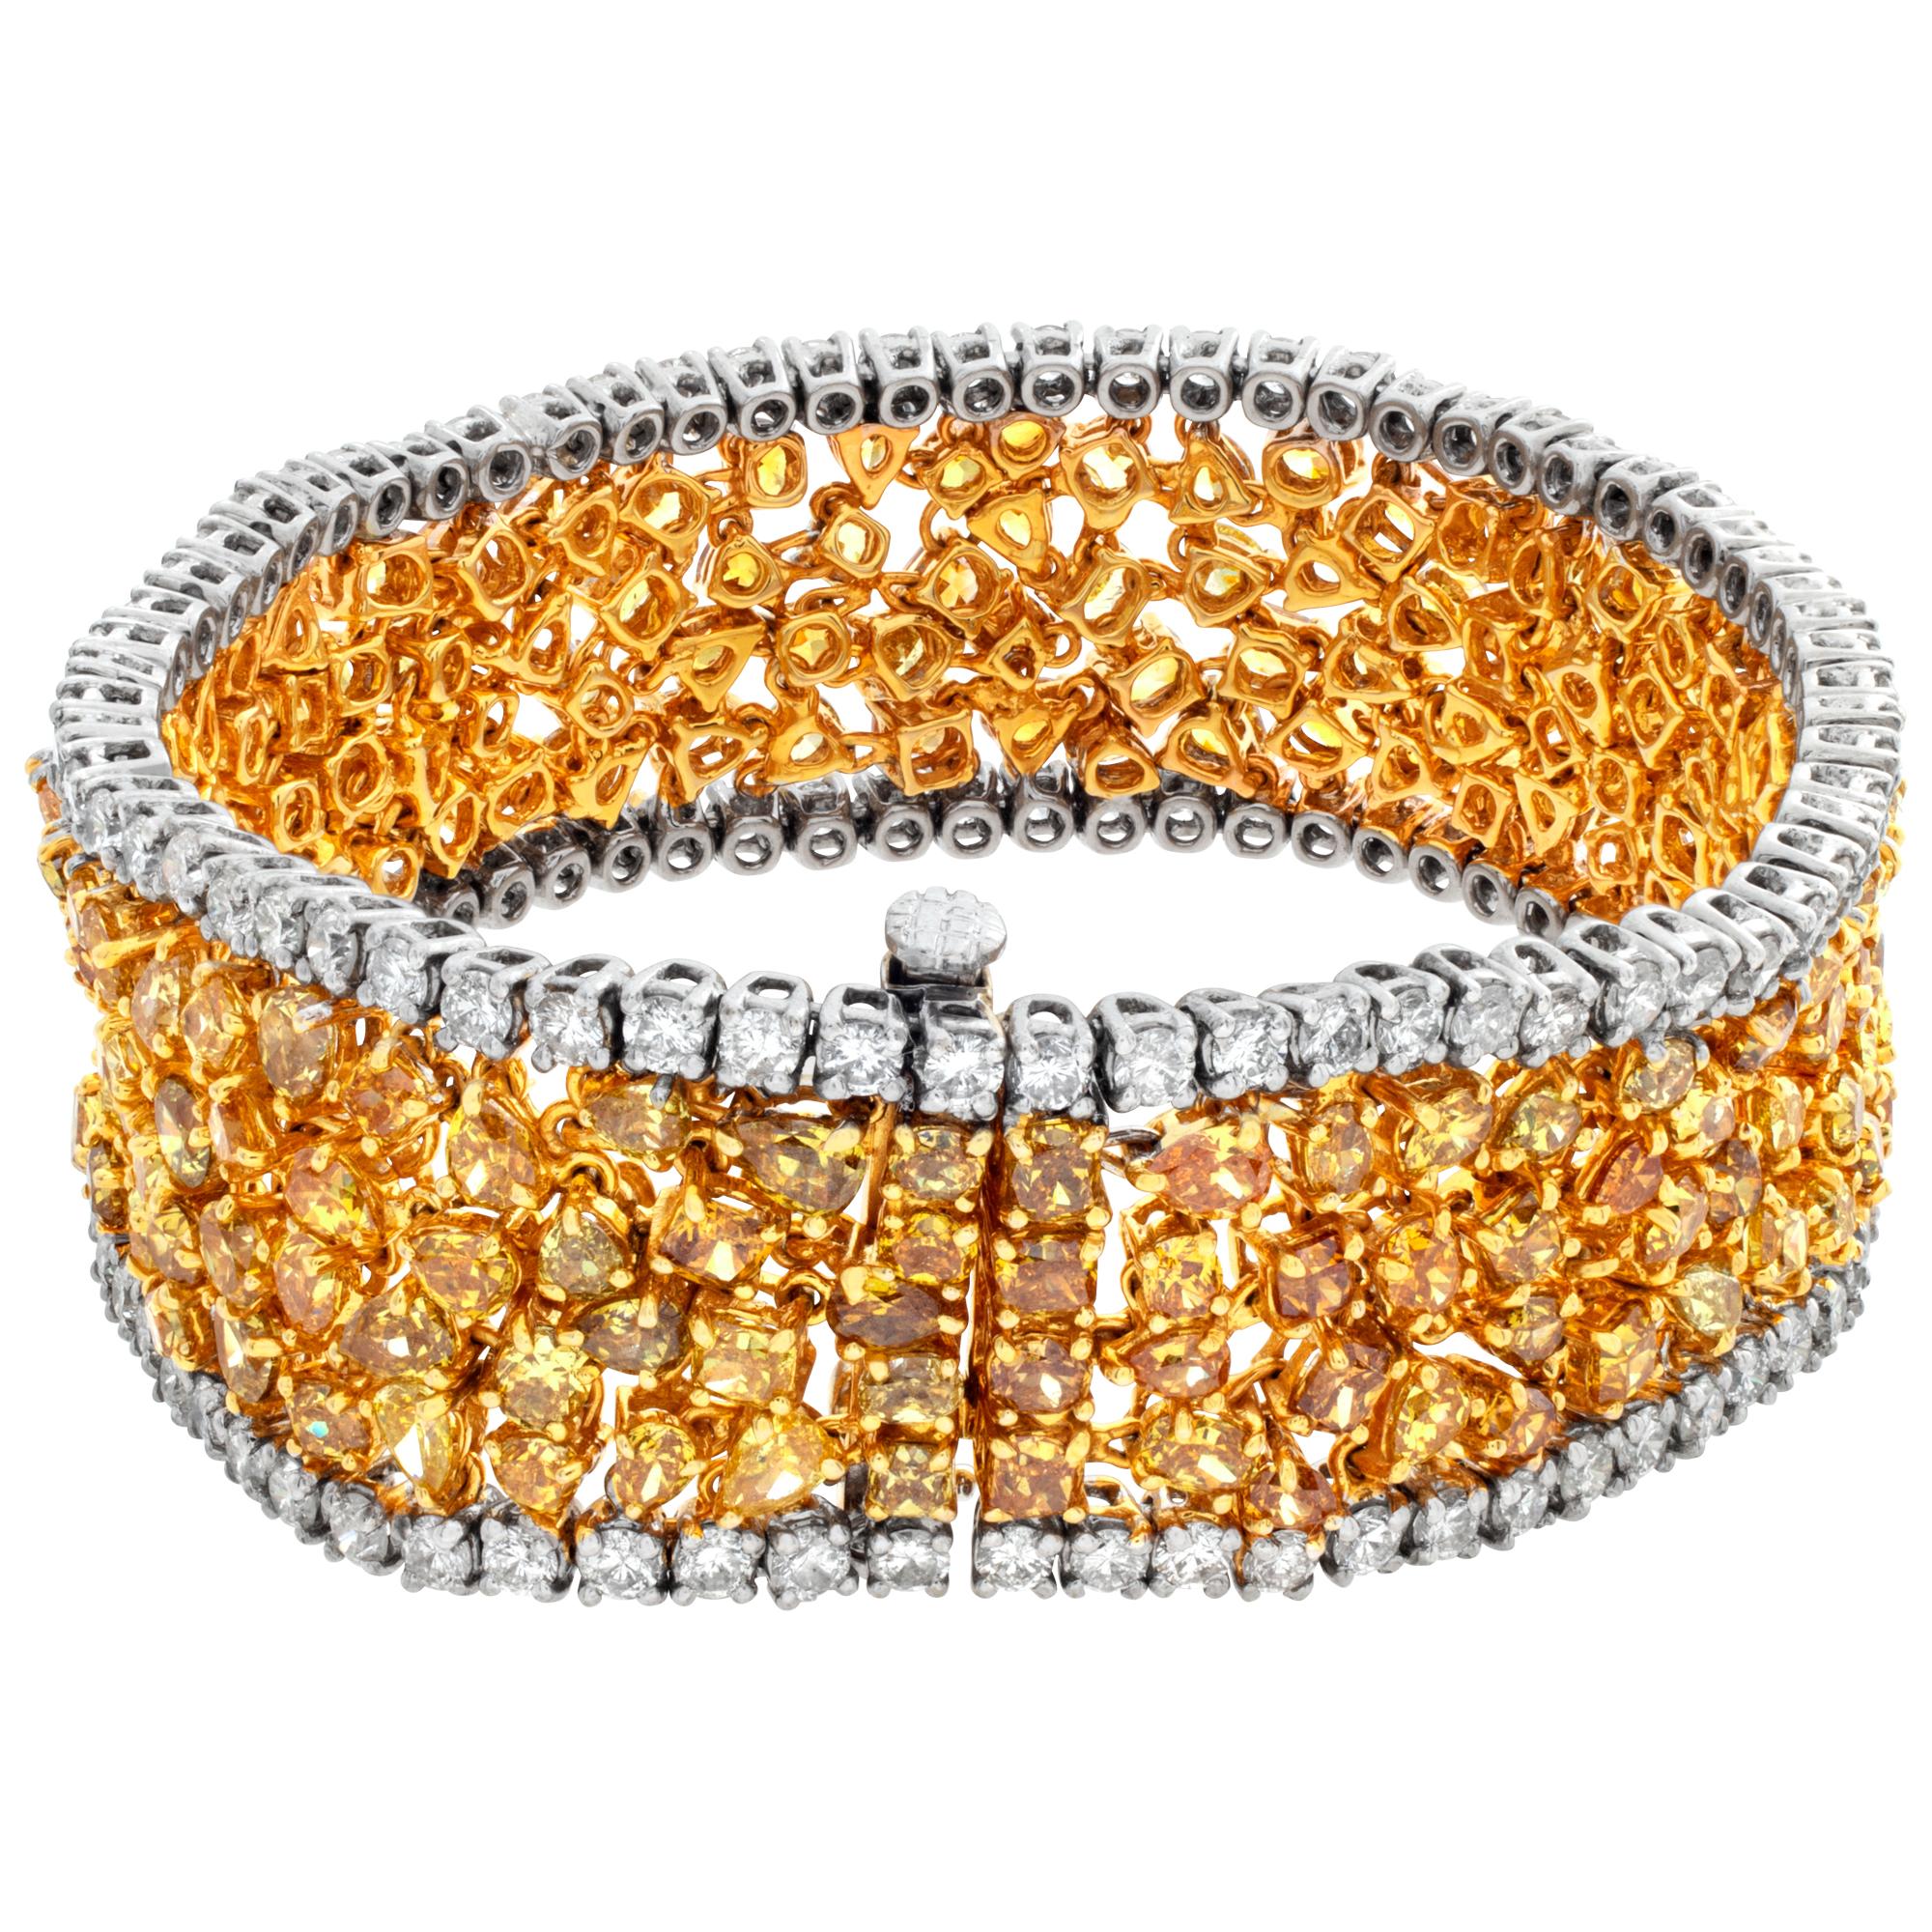 Women's 18k White and Yellow Gold Bracelet with White and Fancy Diamonds